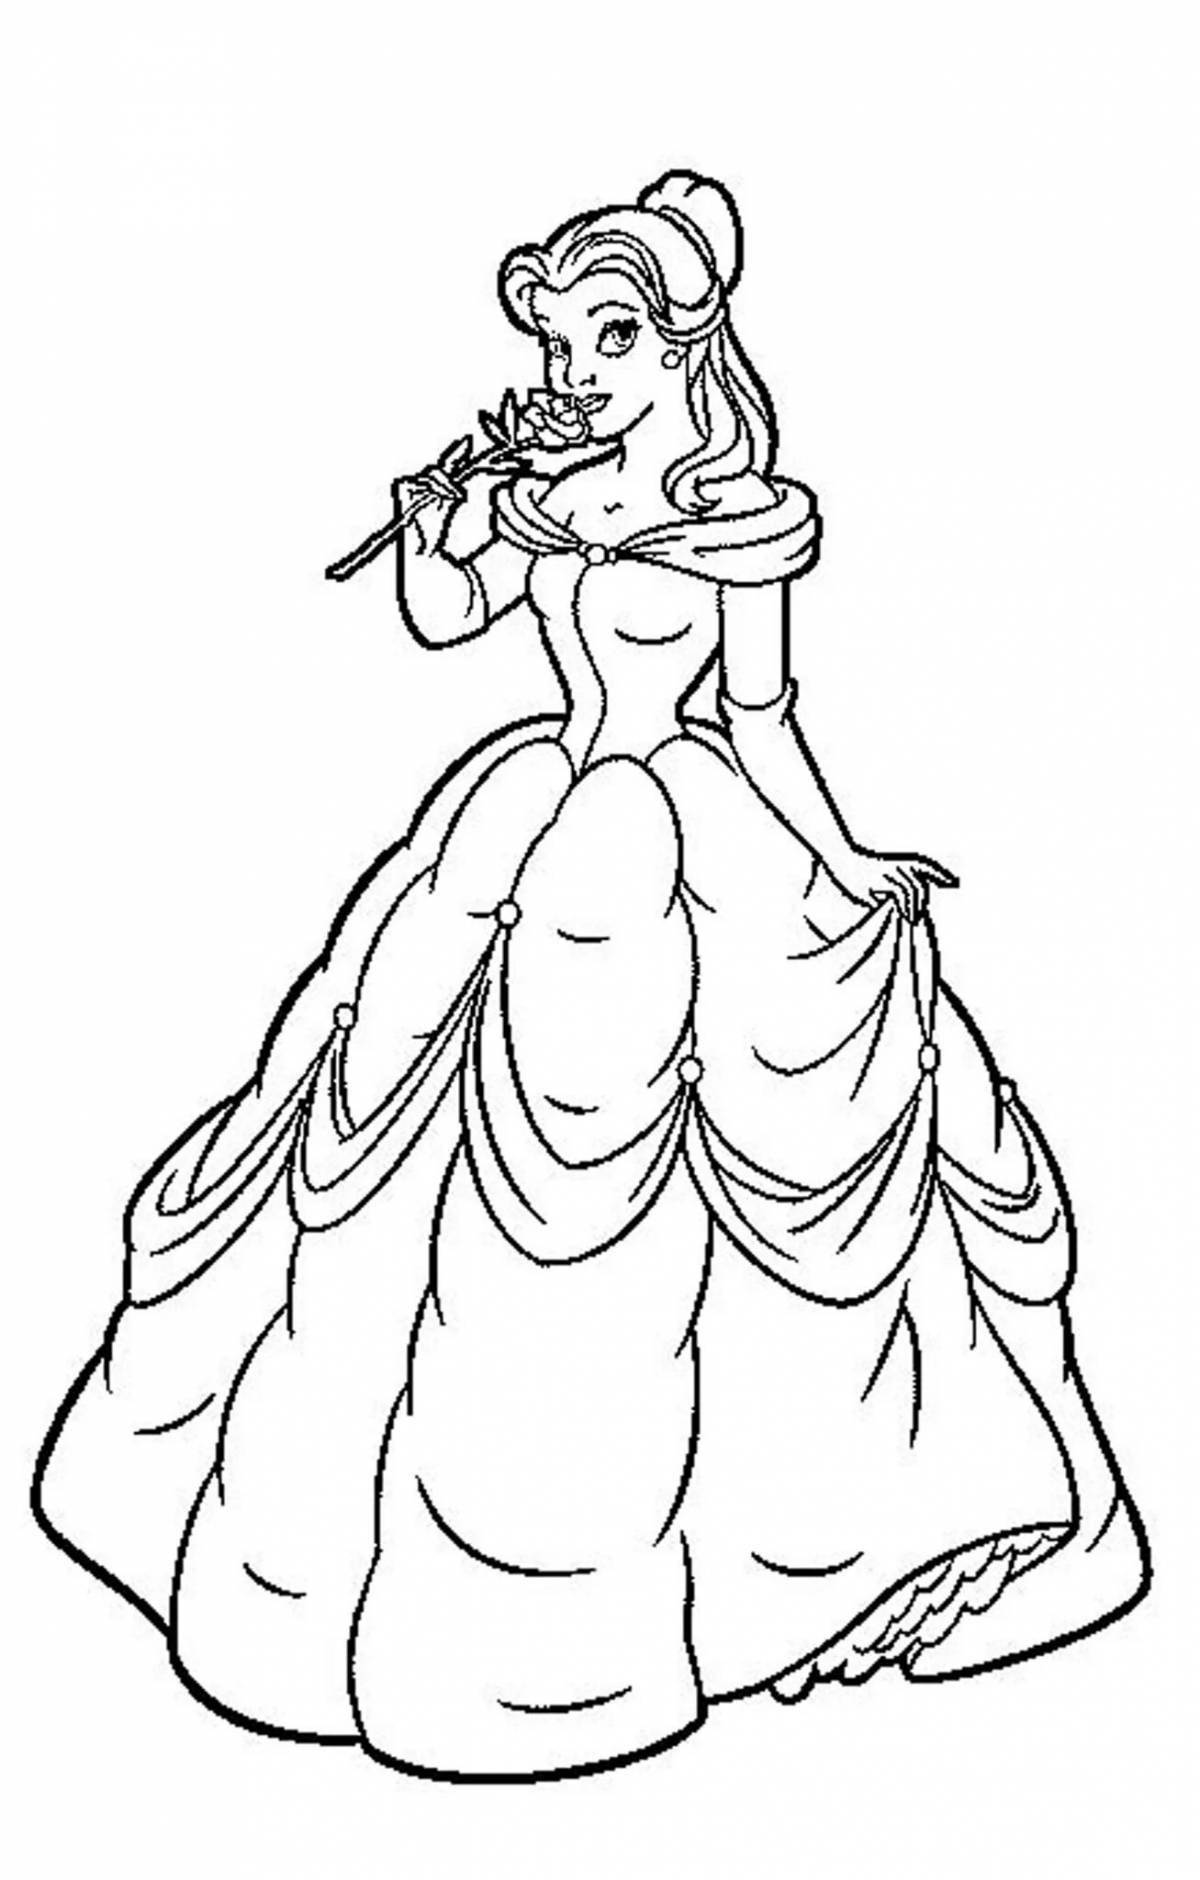 Gorgeous lingerie coloring pages for kids